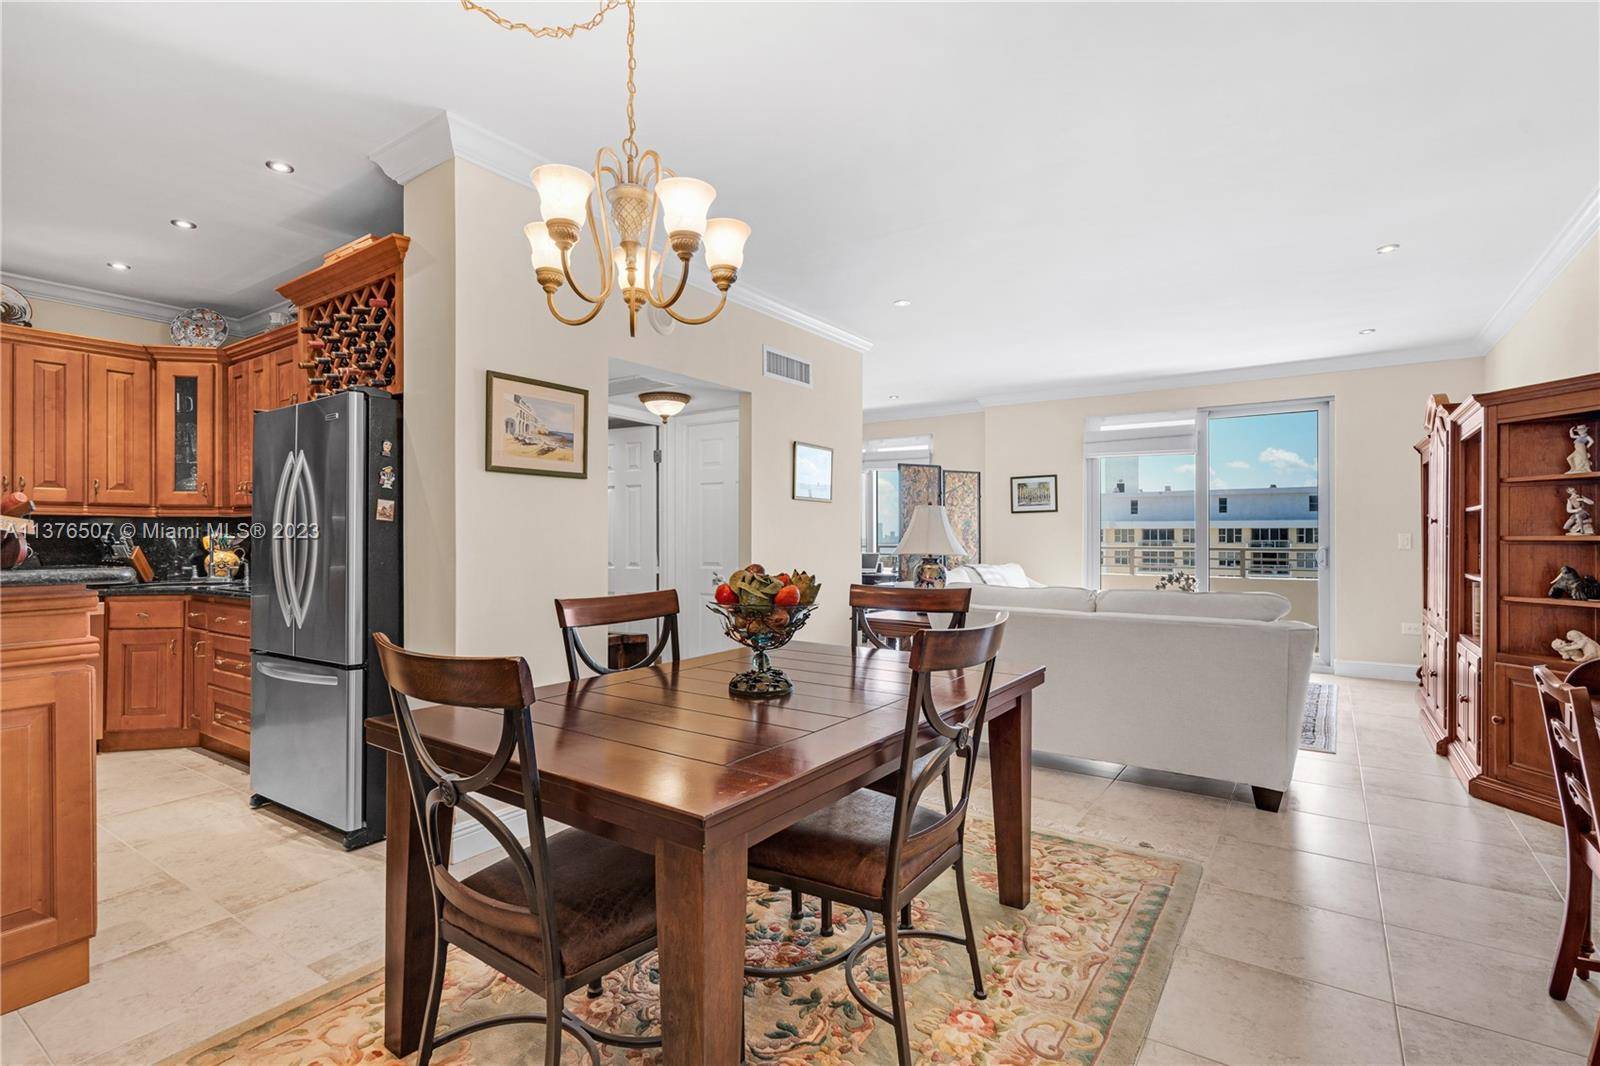 Come make each day a beach day at this exquisitely renovated 2 Bed 2Bath residence with 10 FT ceilings, ceramic floors, custom closet built outs and lights, large terrace, impact ...